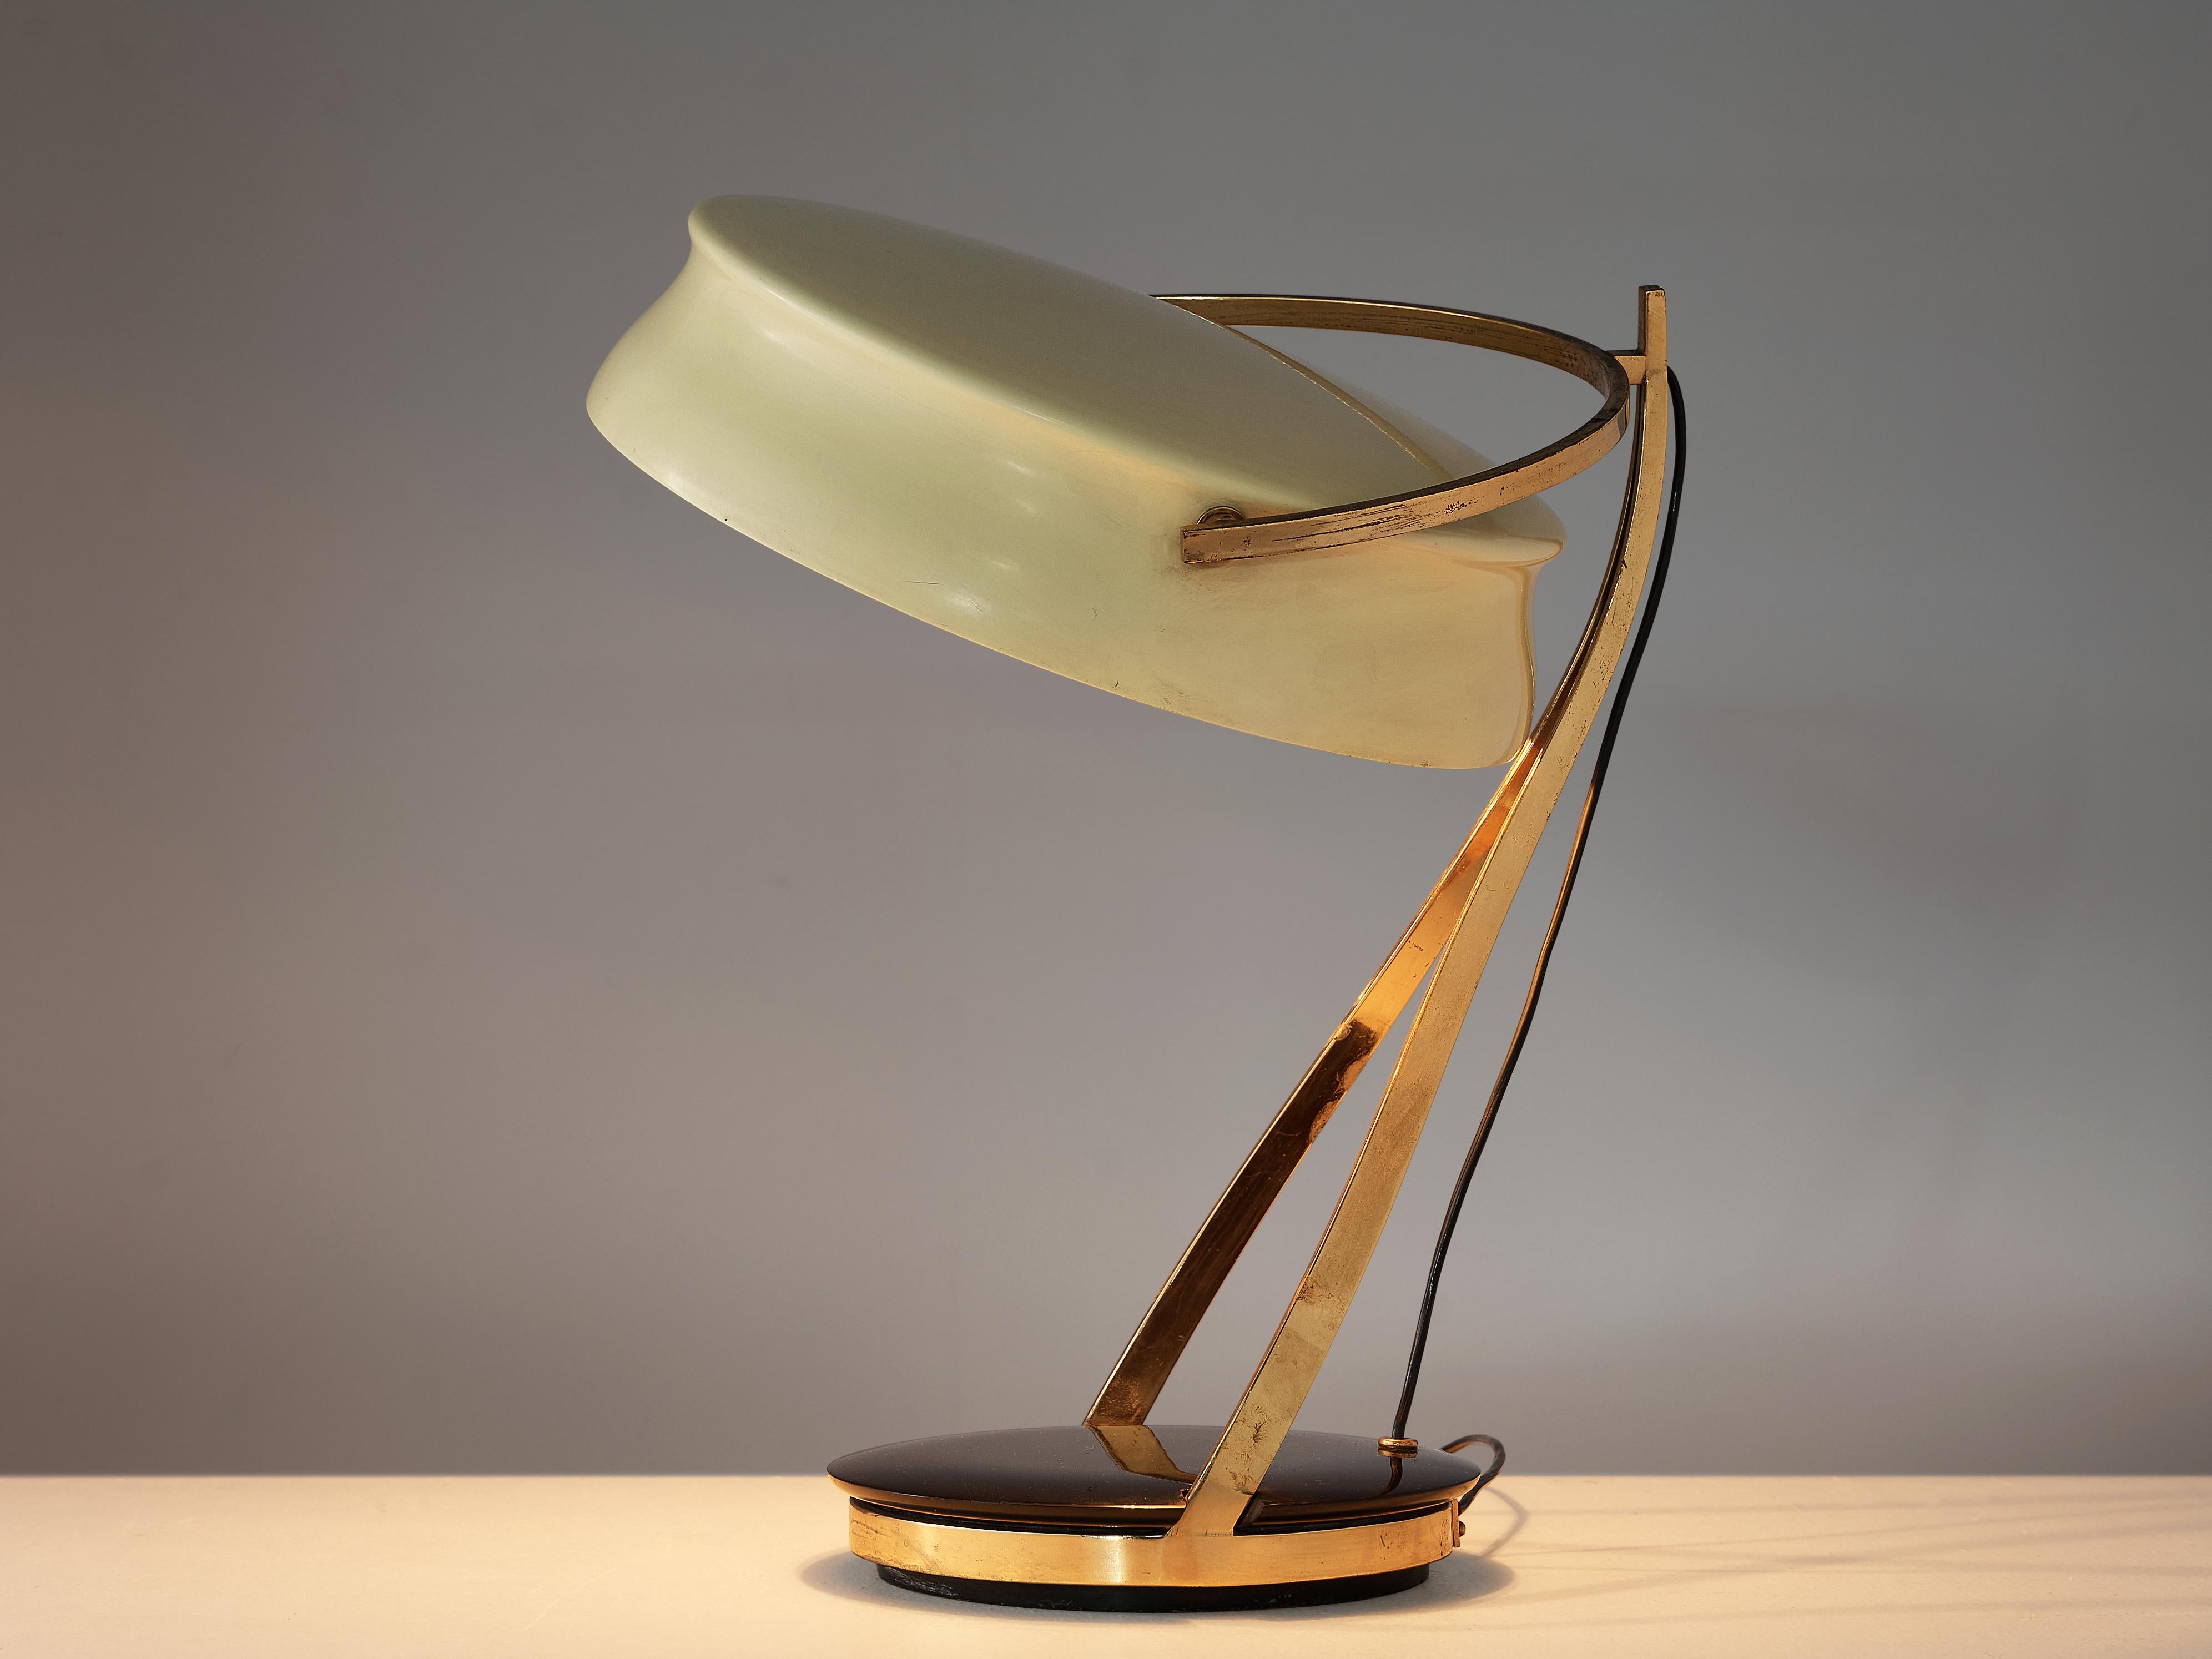 Chiarini Milano, table lamp ‘Commander, brass, metal, stone, Italy, 1950s

Admirable table lamp by Chiarini Milano from the 1950s. The uniquely designed lamp shows dynamic lines, especially in the stem. From a round base in black stone and brass